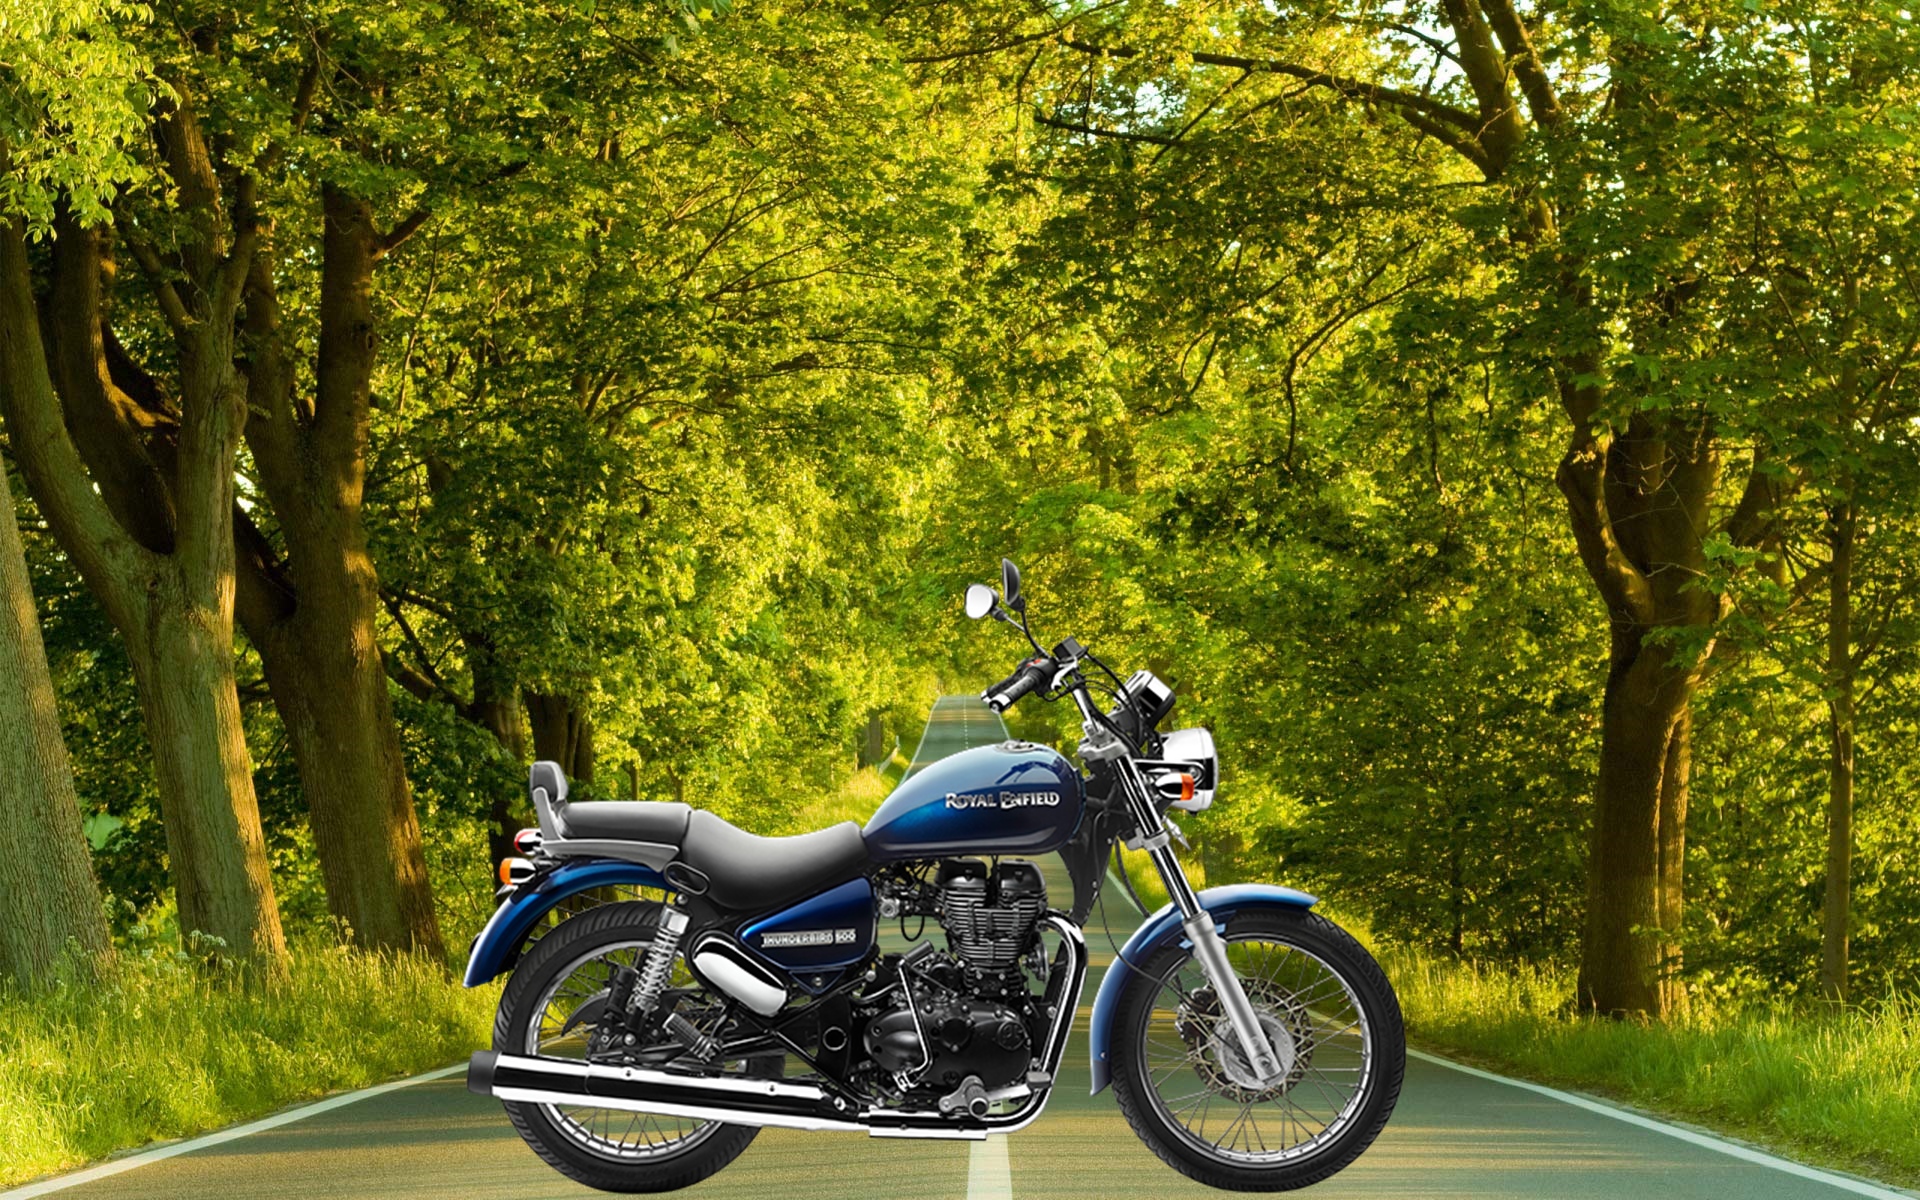 New Colors Of Royal Enfield Classic And Thunderbird